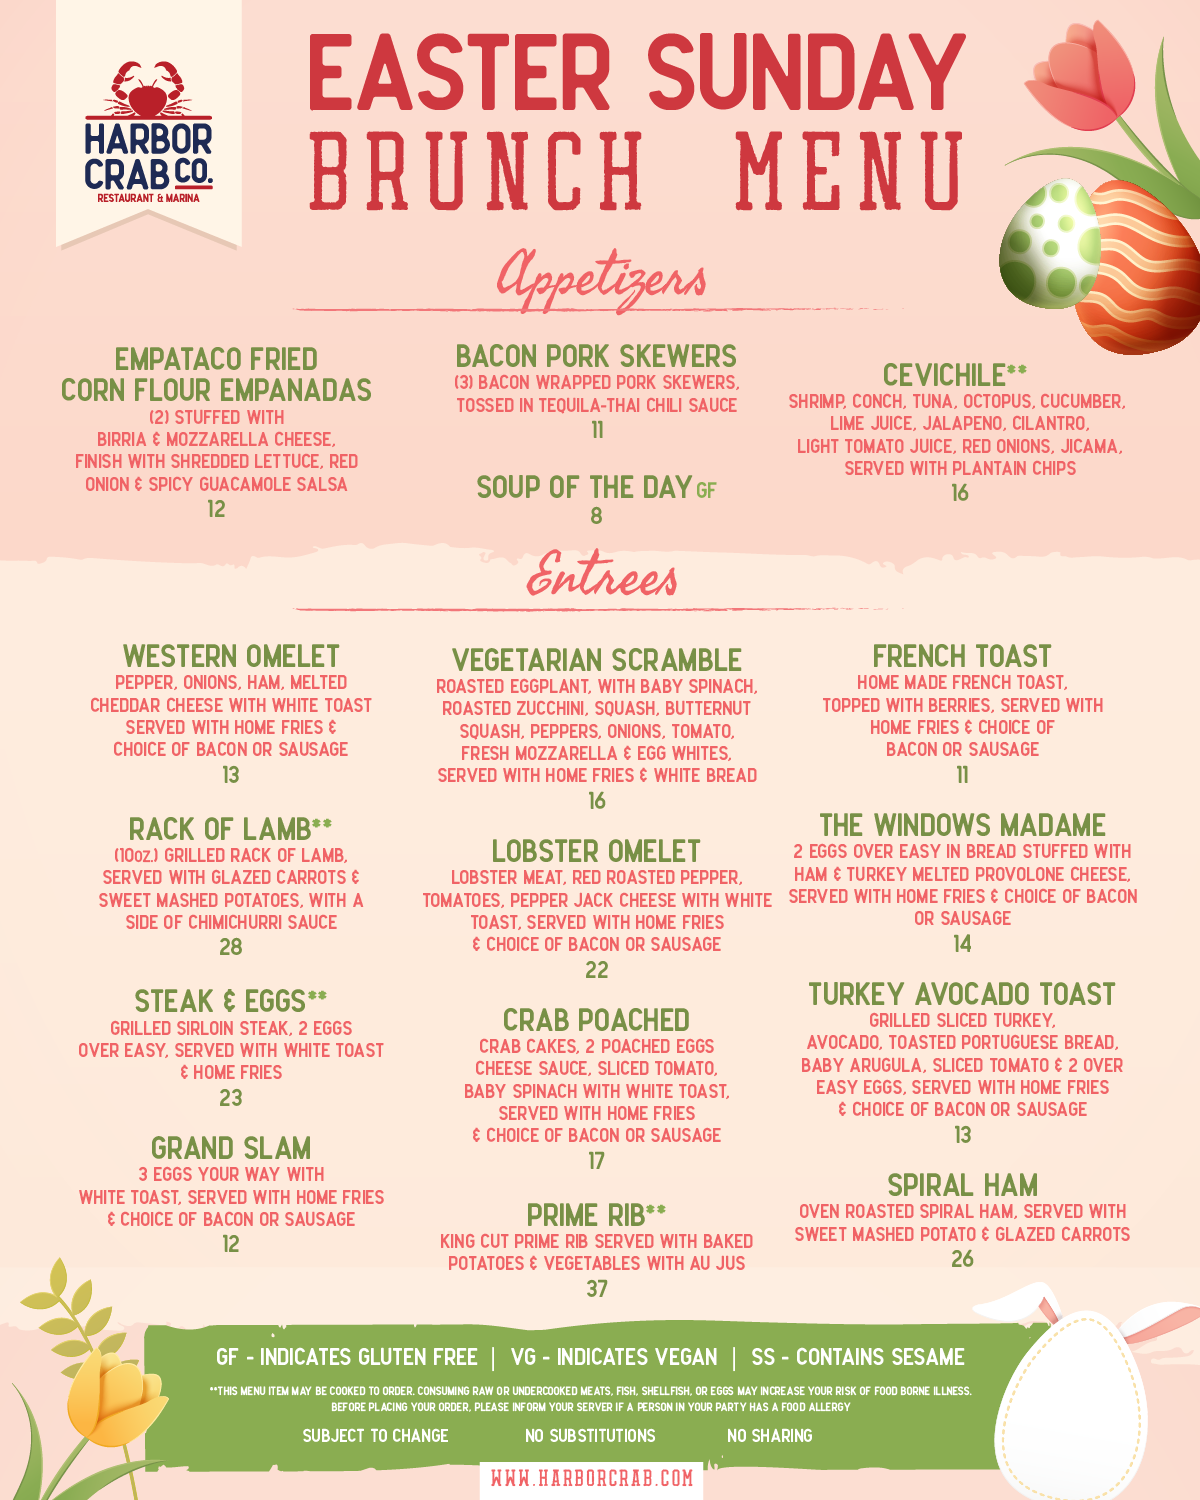 A colorful Easter Sunday Brunch Menu from Harbor Crab Co., featuring appetizers such as Bacon Pork Skewers and EMPATACO Fried Corn Flour Empanadas. Entrees offer a variety including Western Omelet, Vegetarian Scramble, French Toast, Rack of Lamb, Lobster Omelet, Crab Eggs Poached, and more. Breakfast classics are presented alongside unique creations, with a special mention of gluten-free and vegan options. The menu design includes spring flowers and painted Easter eggs, creating a cheerful holiday mood.